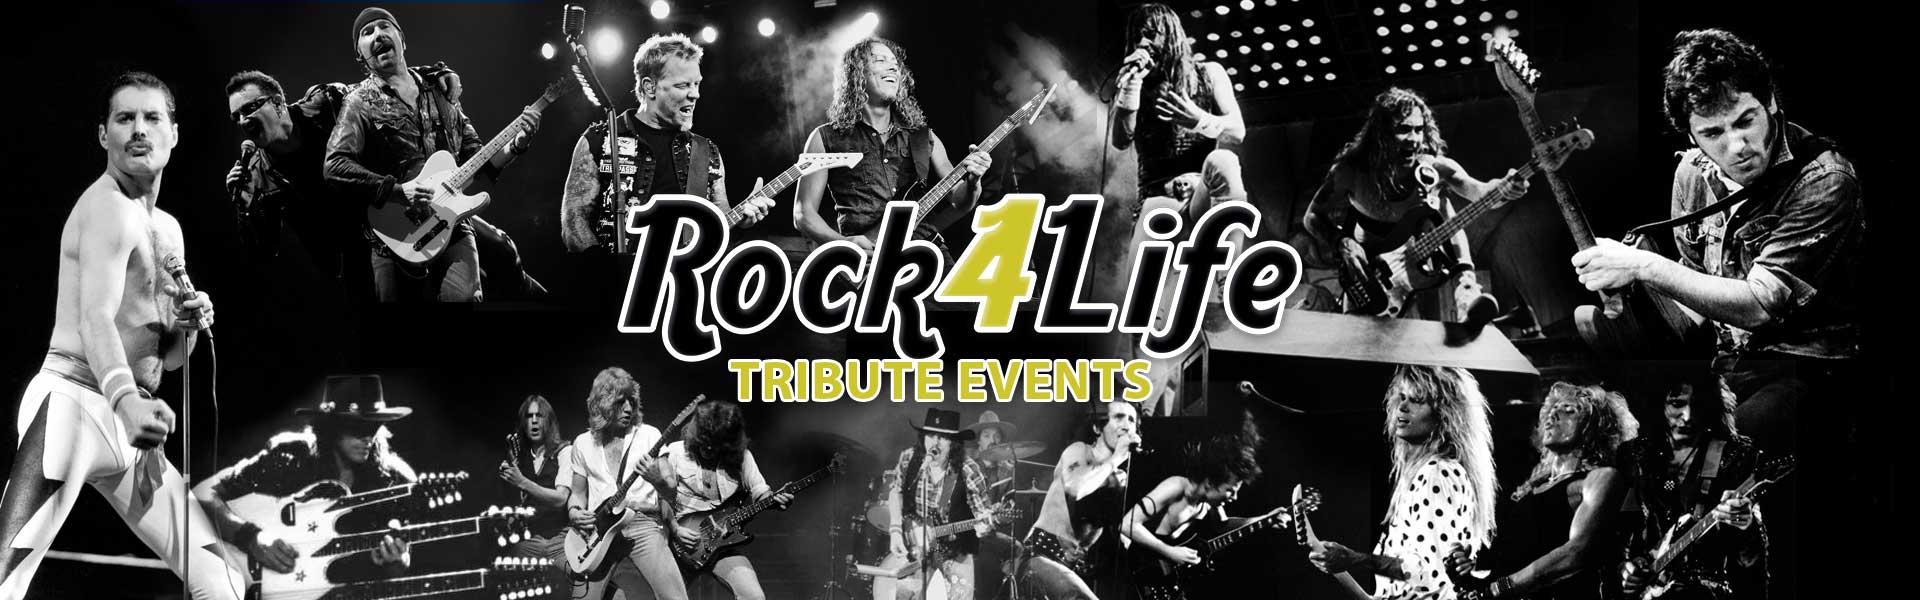 rock4life_tribute_events_02